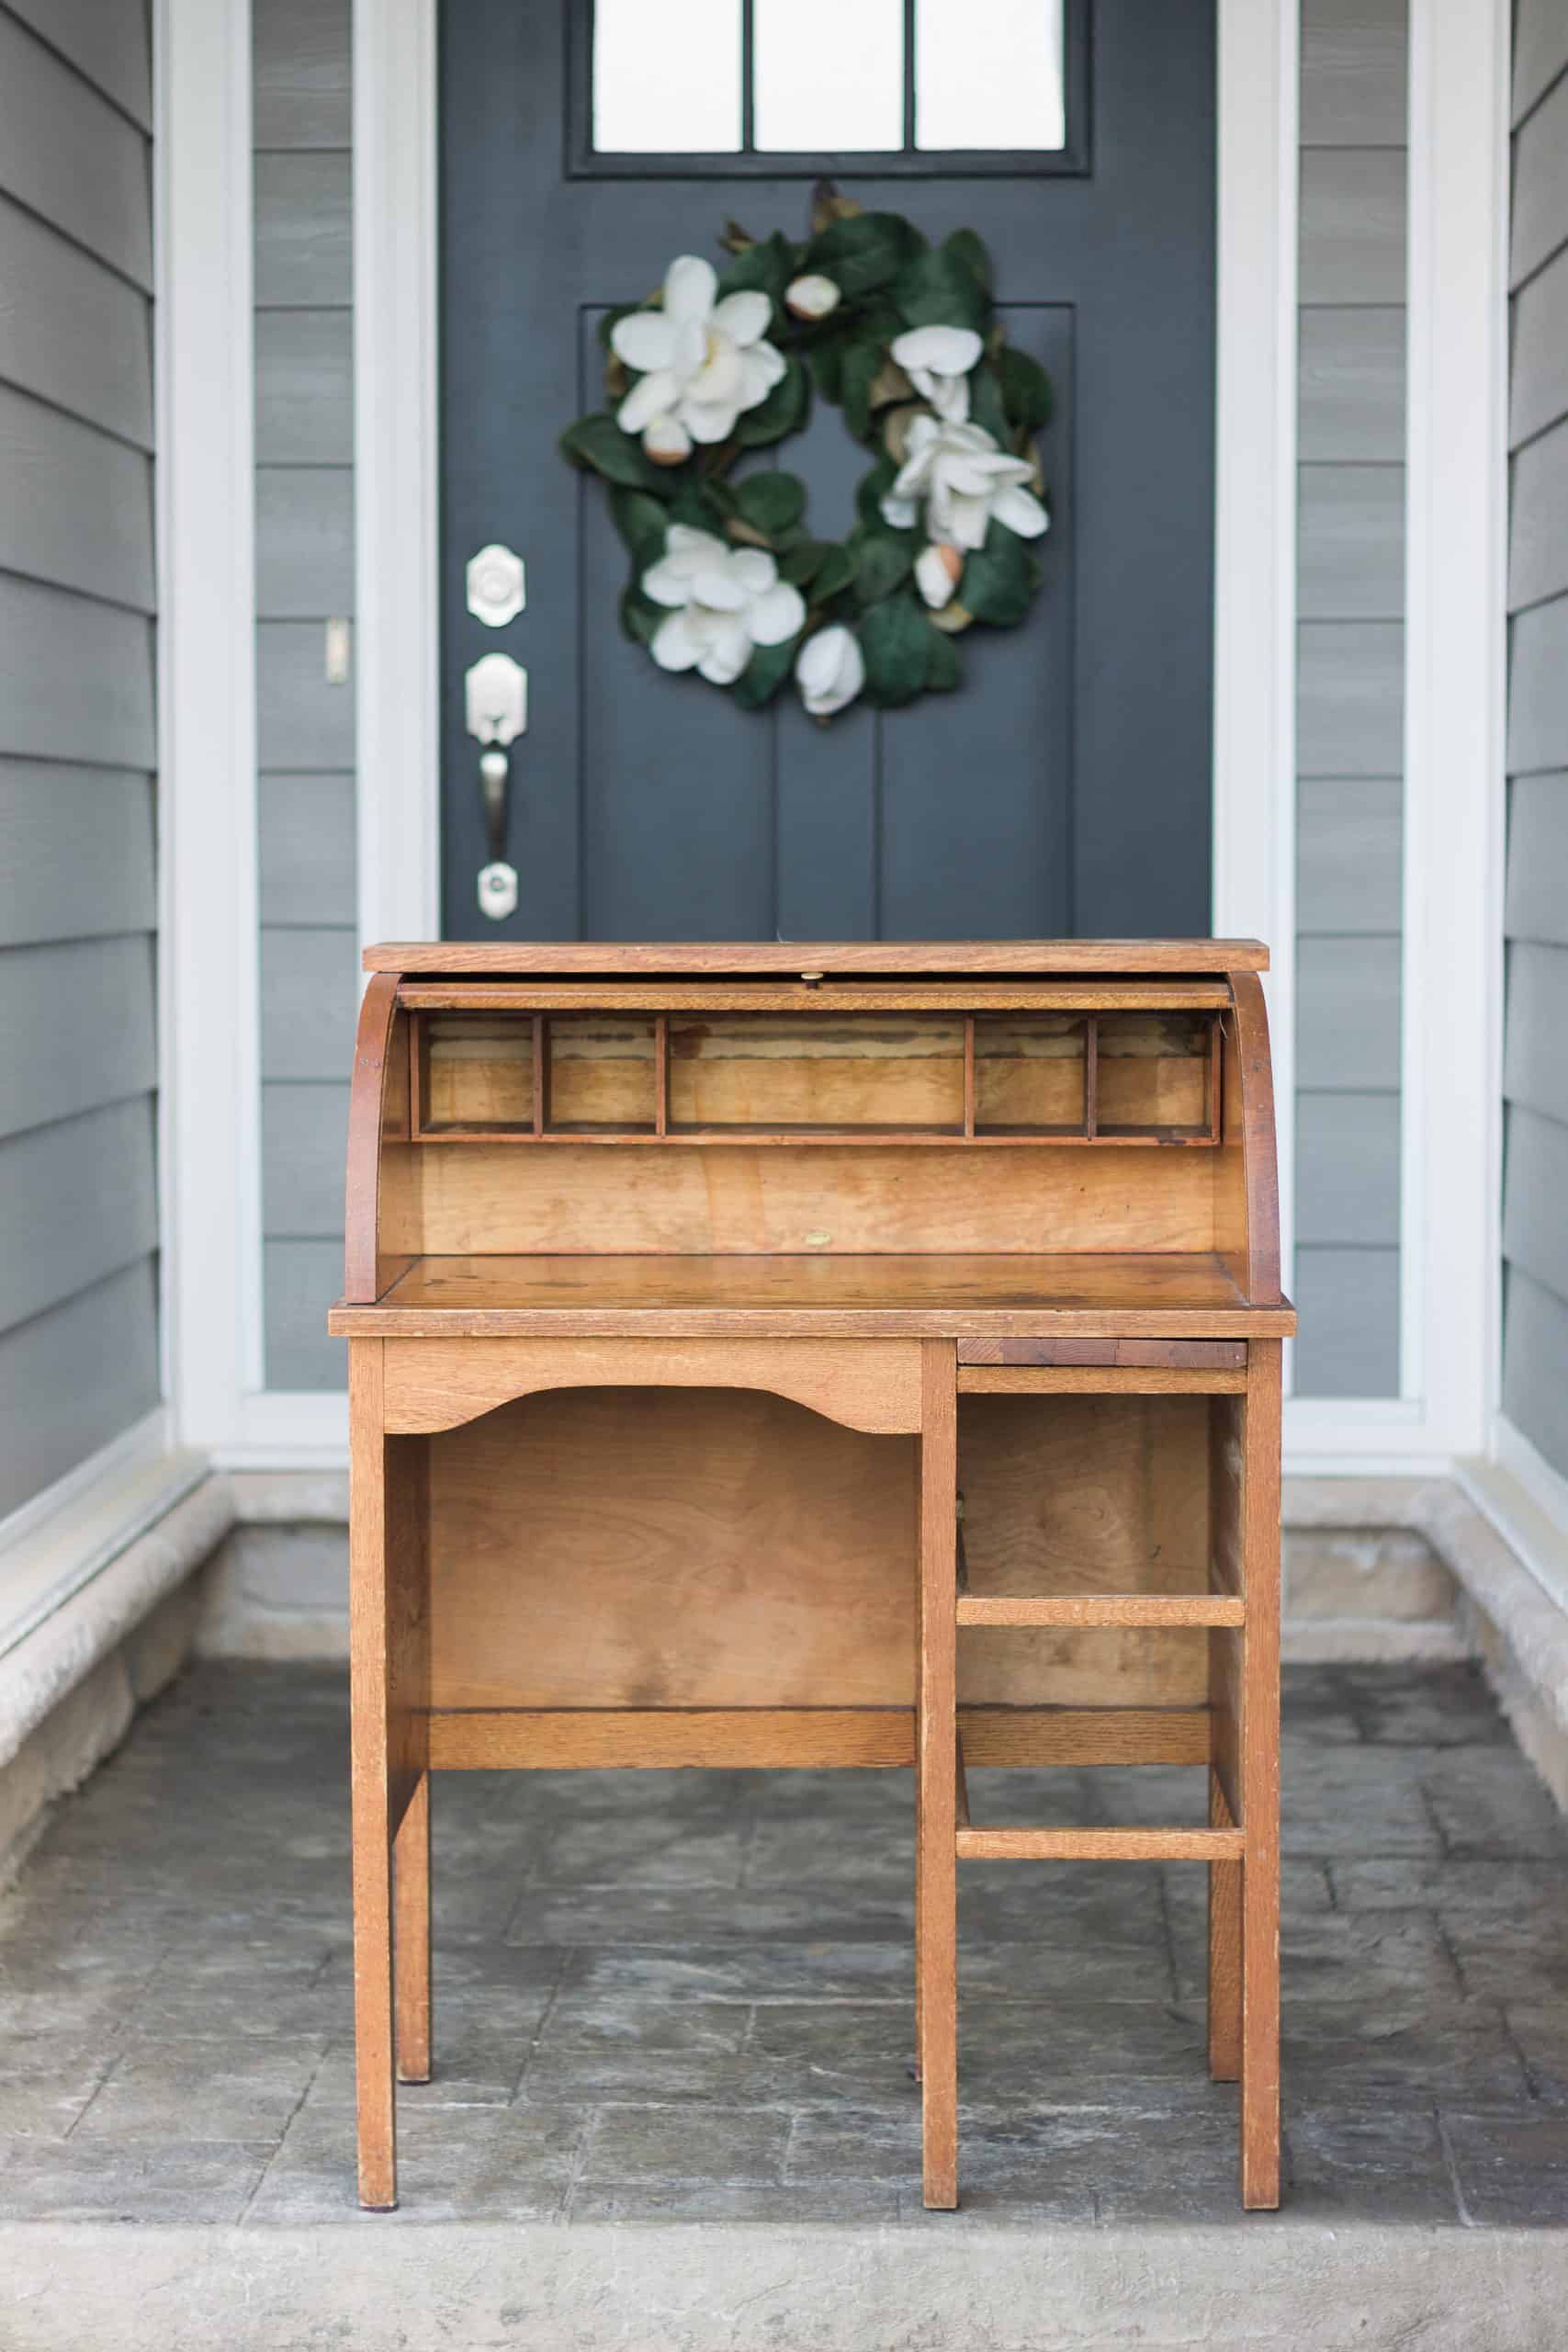 Learn how we managed to achieve the perfect vintage-yet-slightly-modern finish on a children's rolltop desk. Visit www.freeandunfettered.com for the complete details on our vintage children's rolltop desk makeover. #vintagefurniture #reclaimed #modernhome #eclecticdecor #kidsroom 